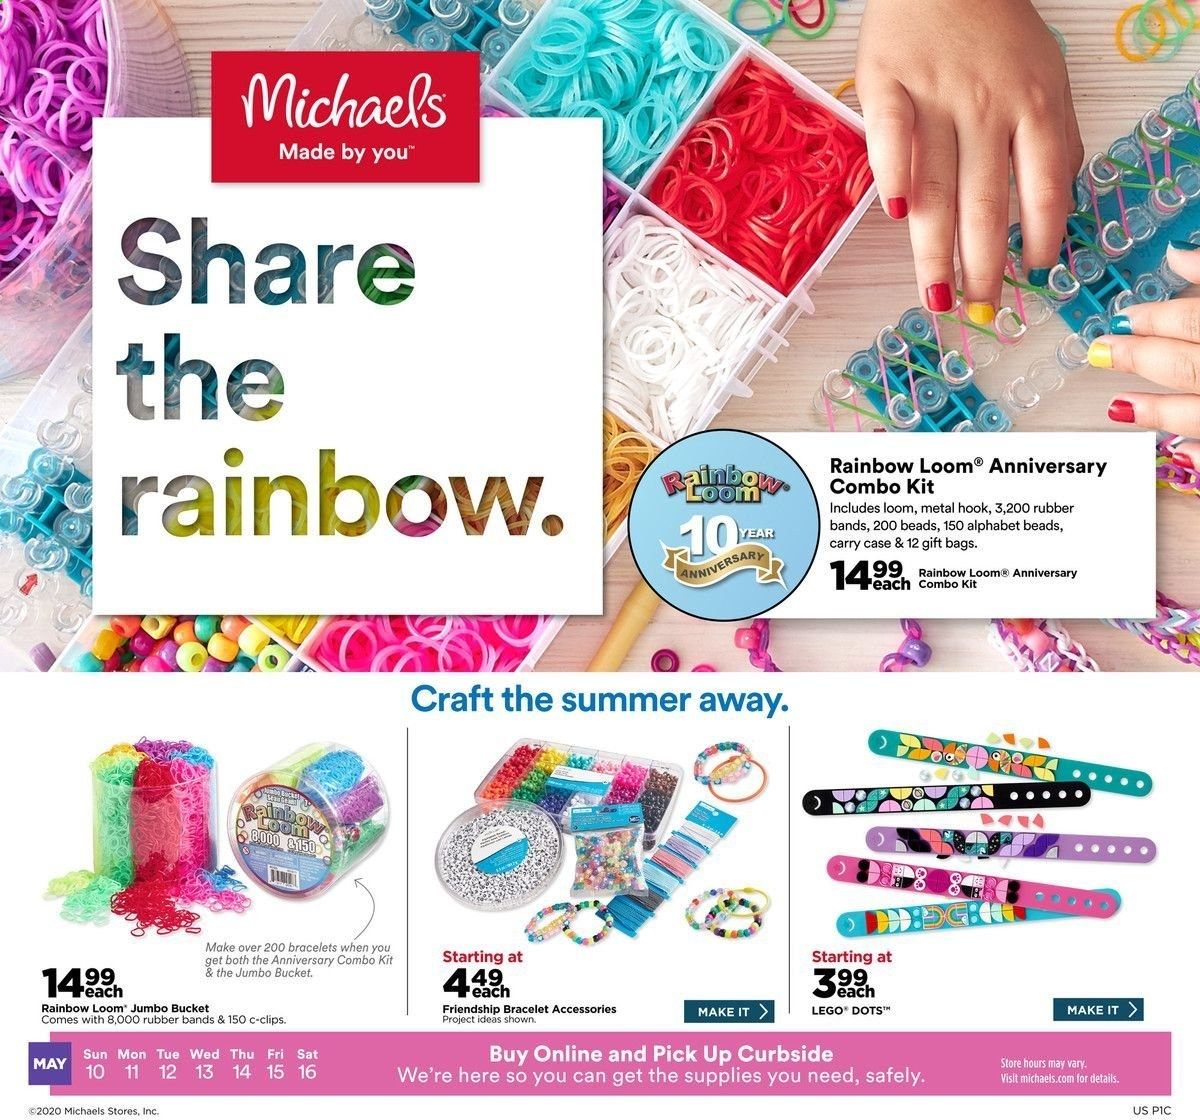 Michaels Weekly Flyer - Weekly Deals - The Big Summer Sale - May